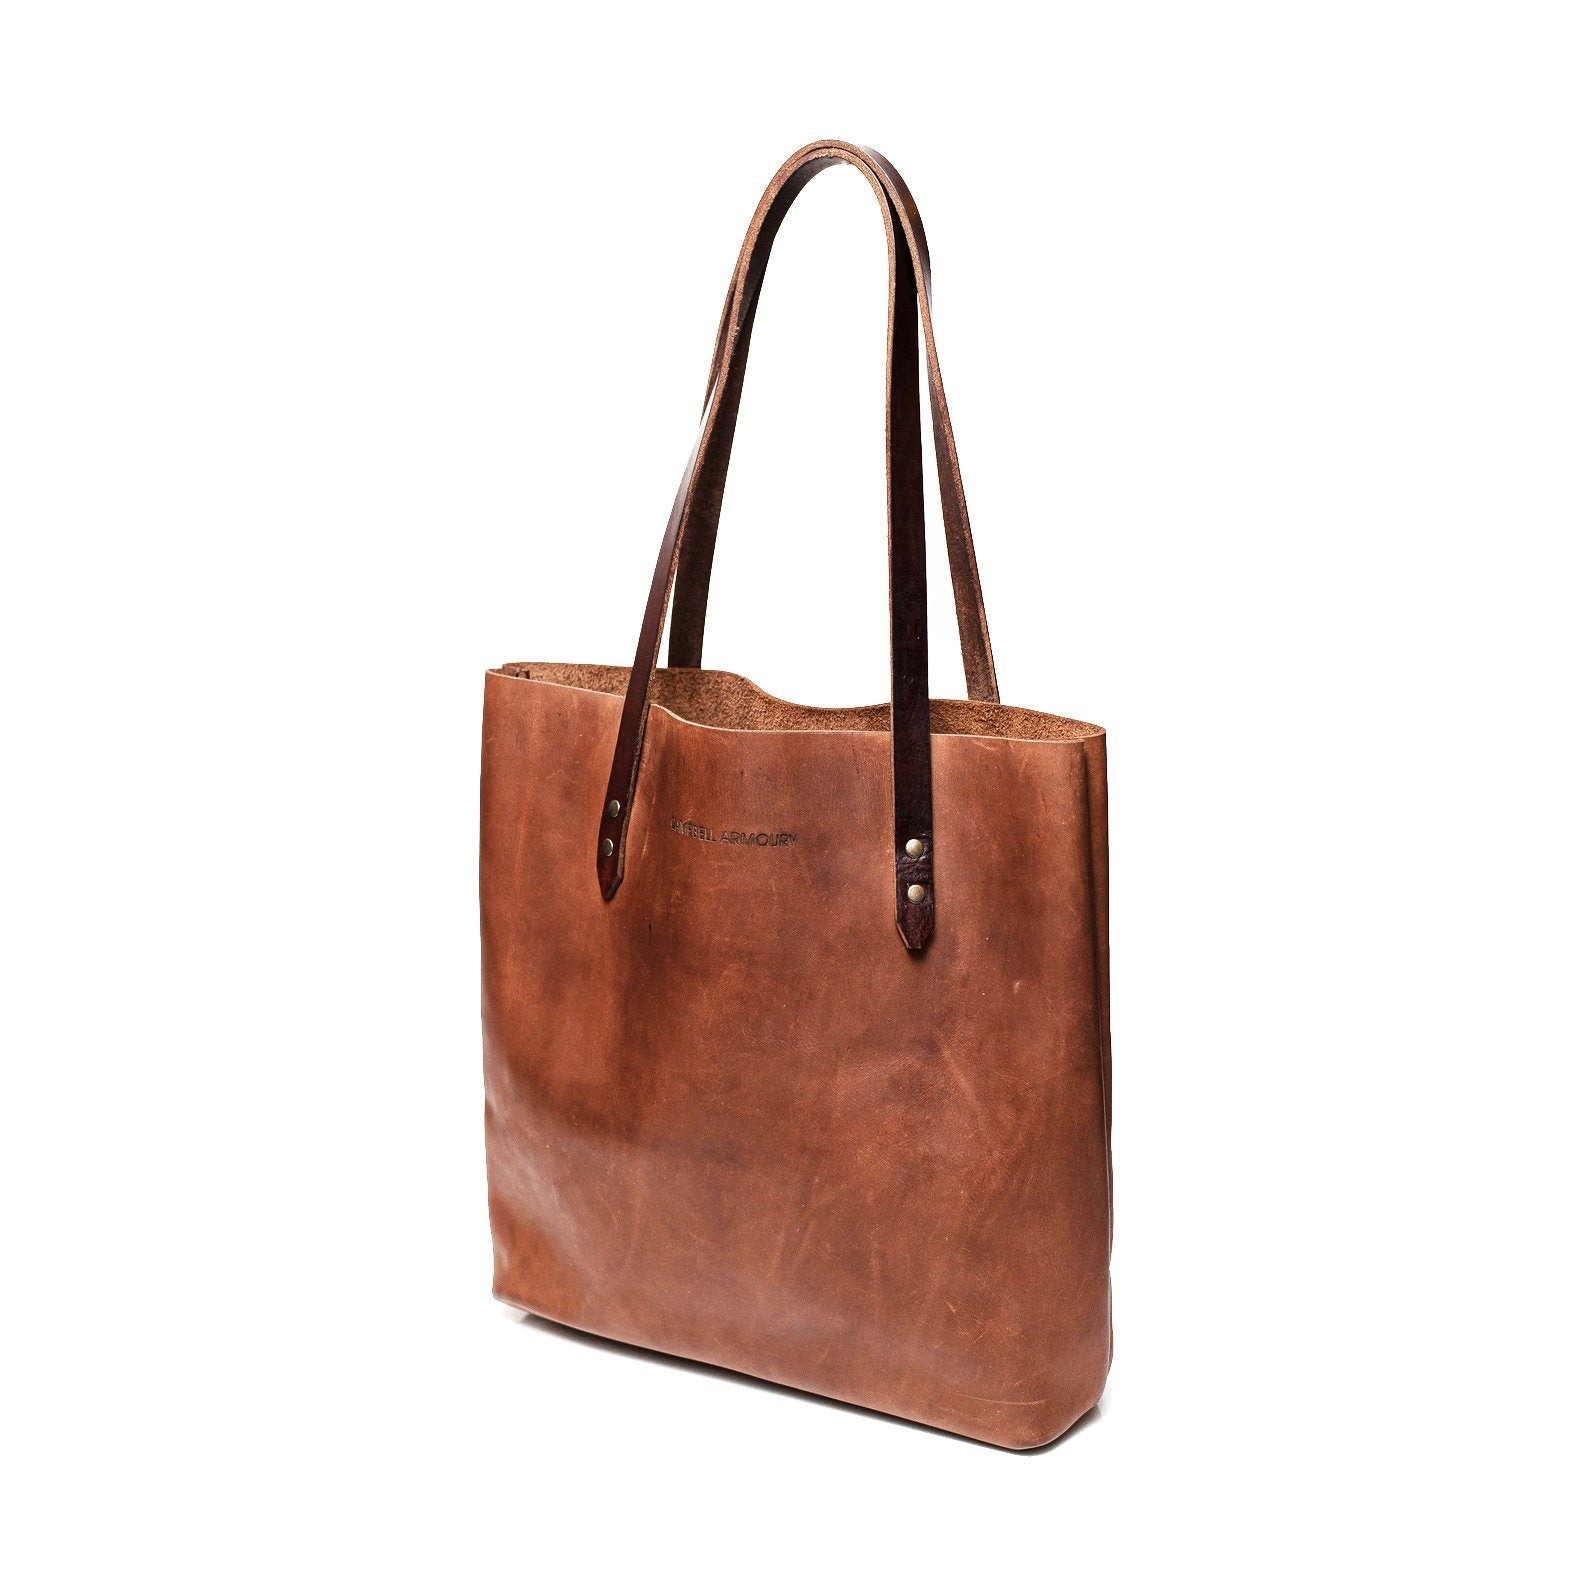 Campbell Armoury Leather Soft Tote Bag clothing & accessories Campbell Armoury brown